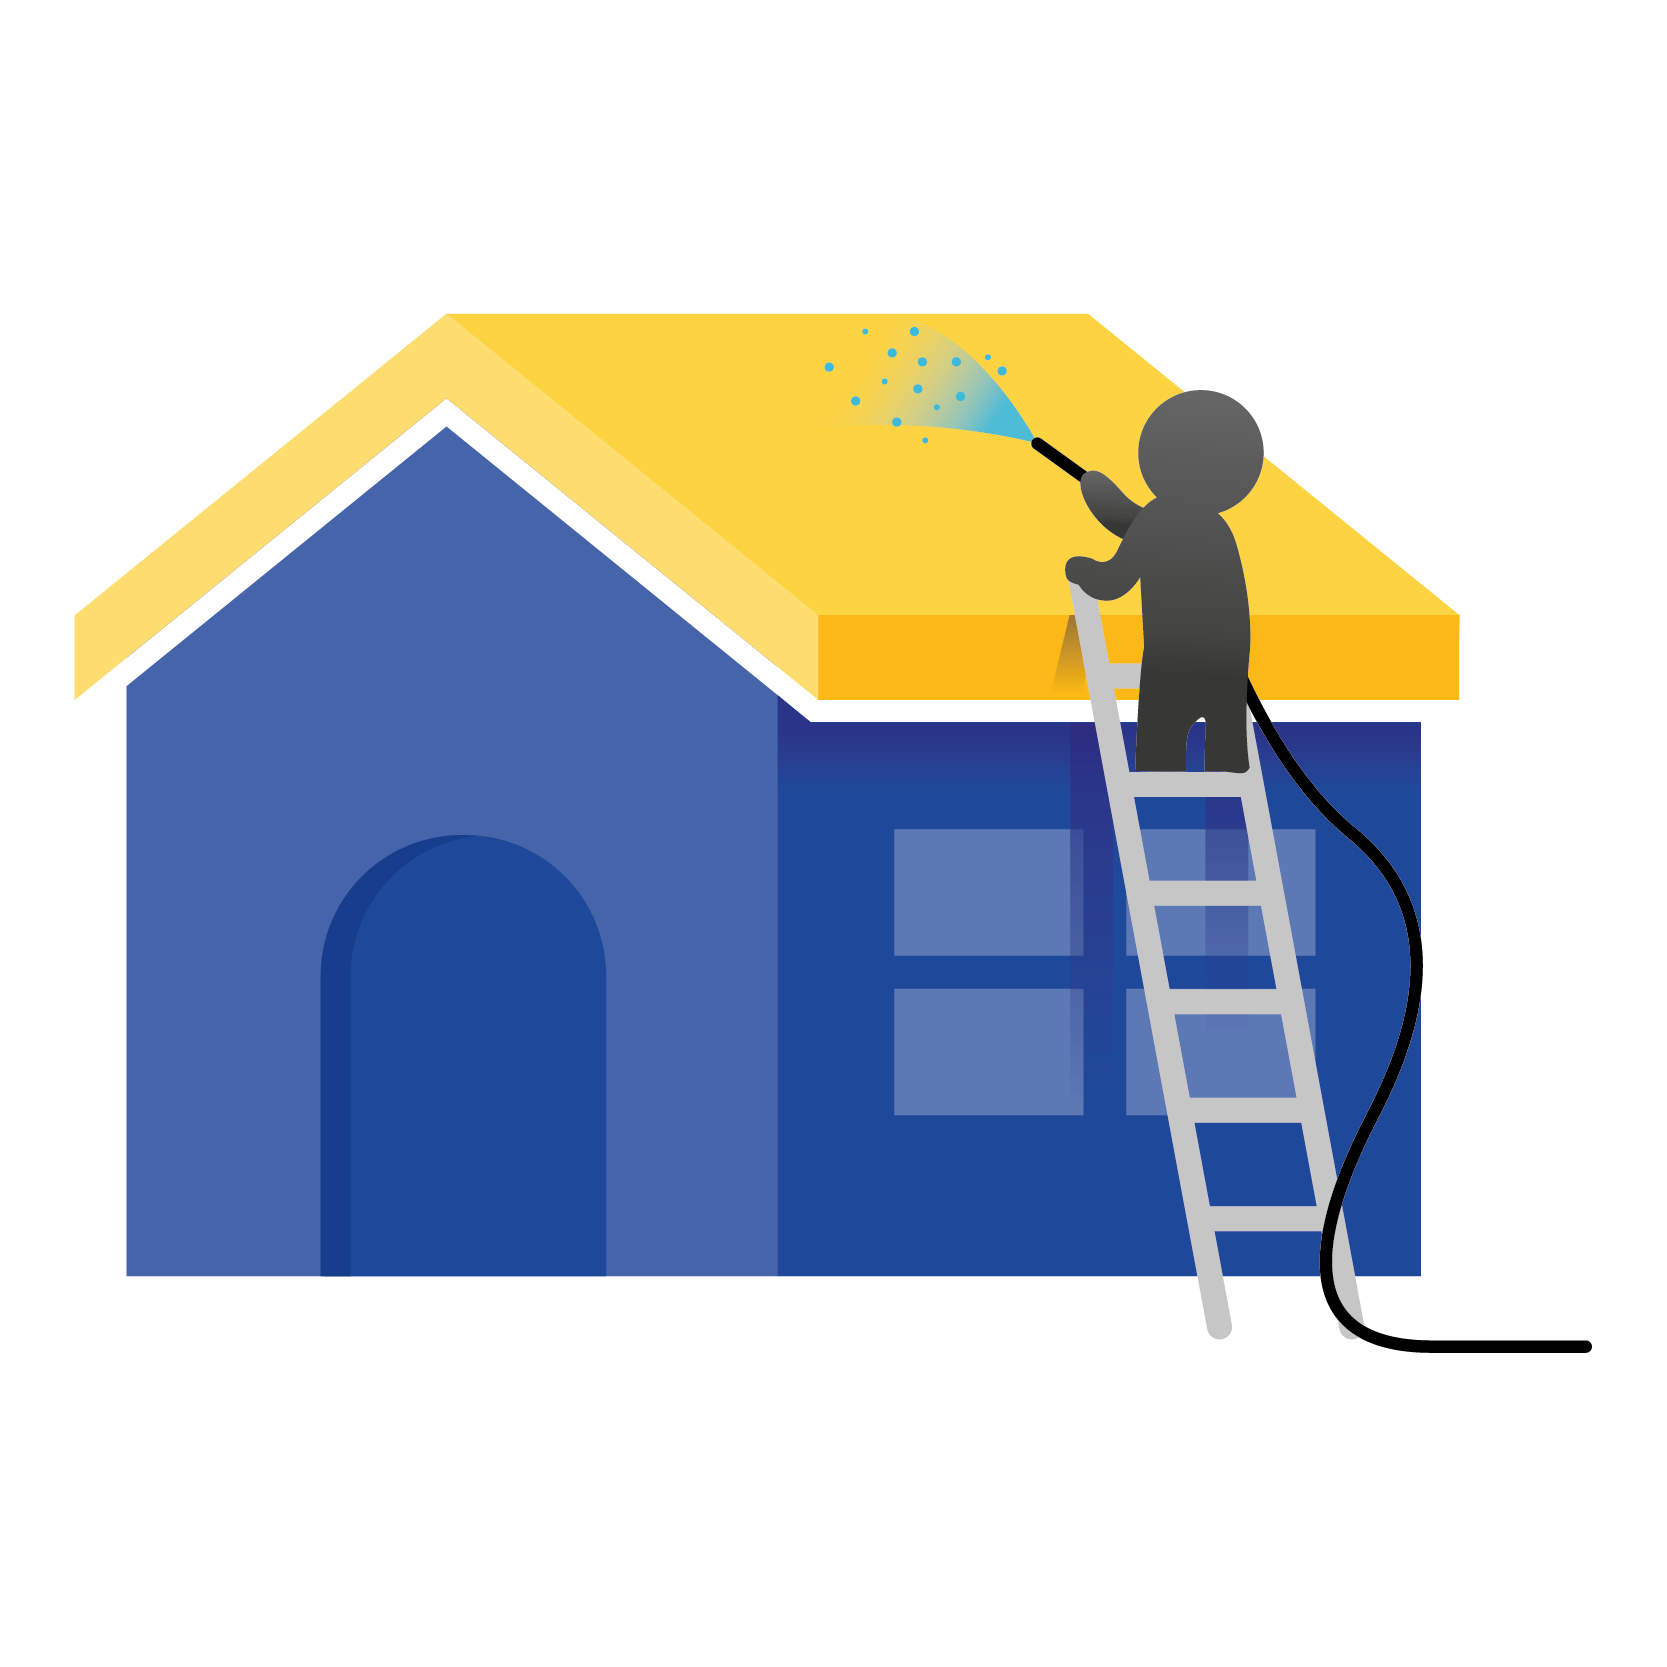 A man is washing the roof of a blue house.